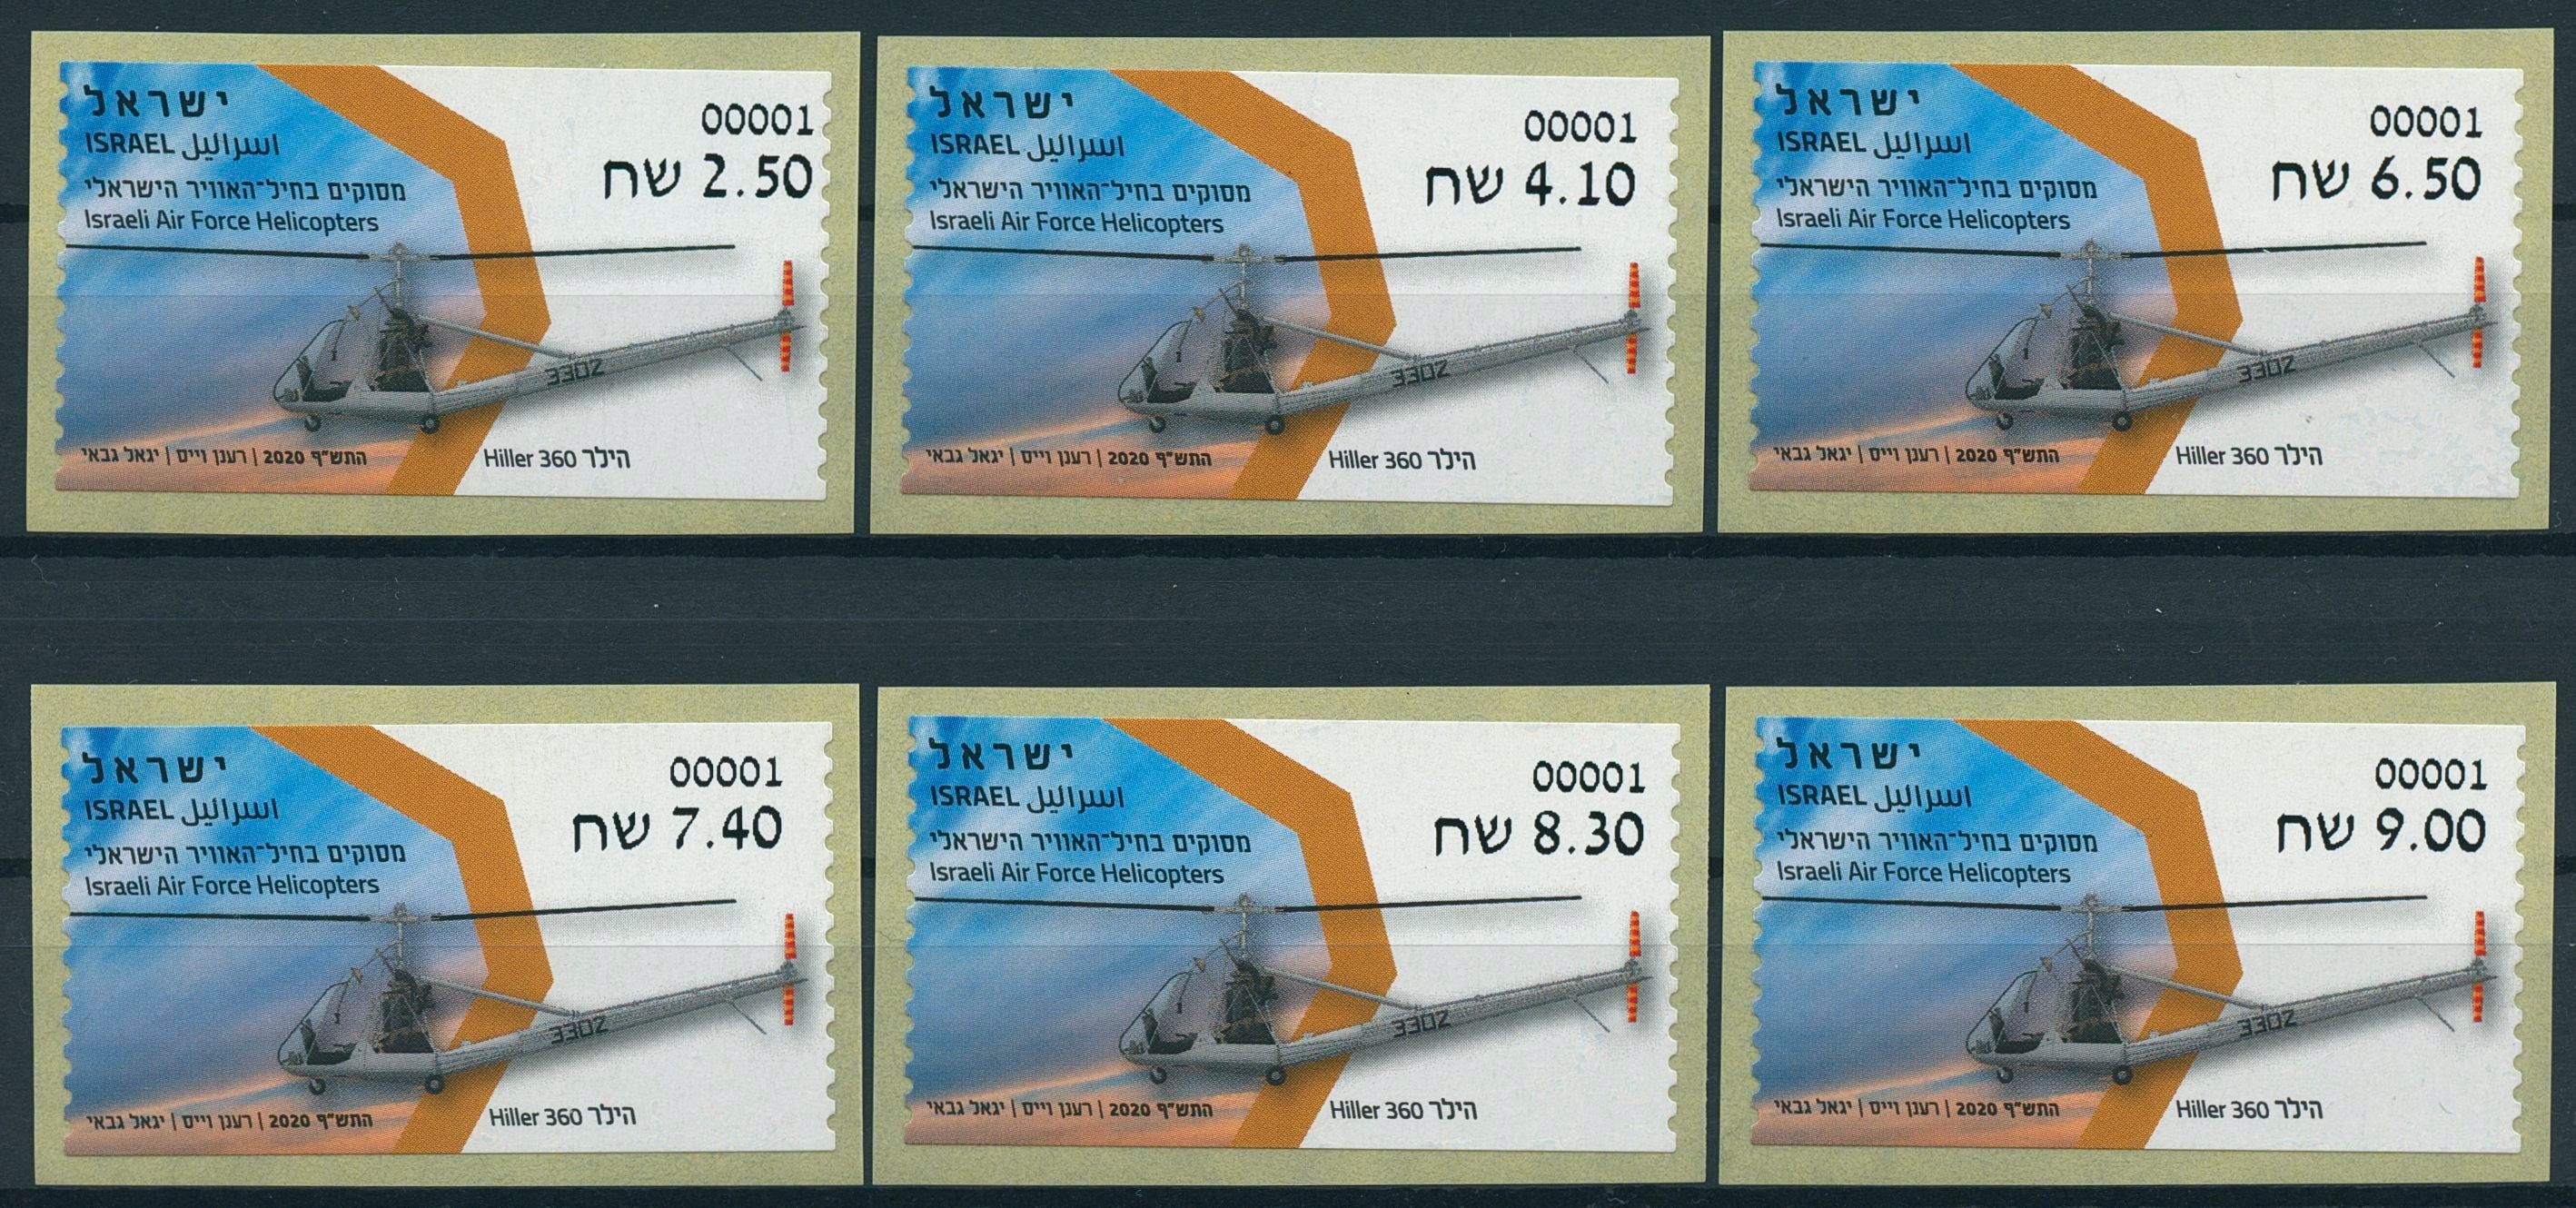 Israel Aviation Stamps 2020 MNH Air Force Helicopters Hiller 6v S/A ATM Labels